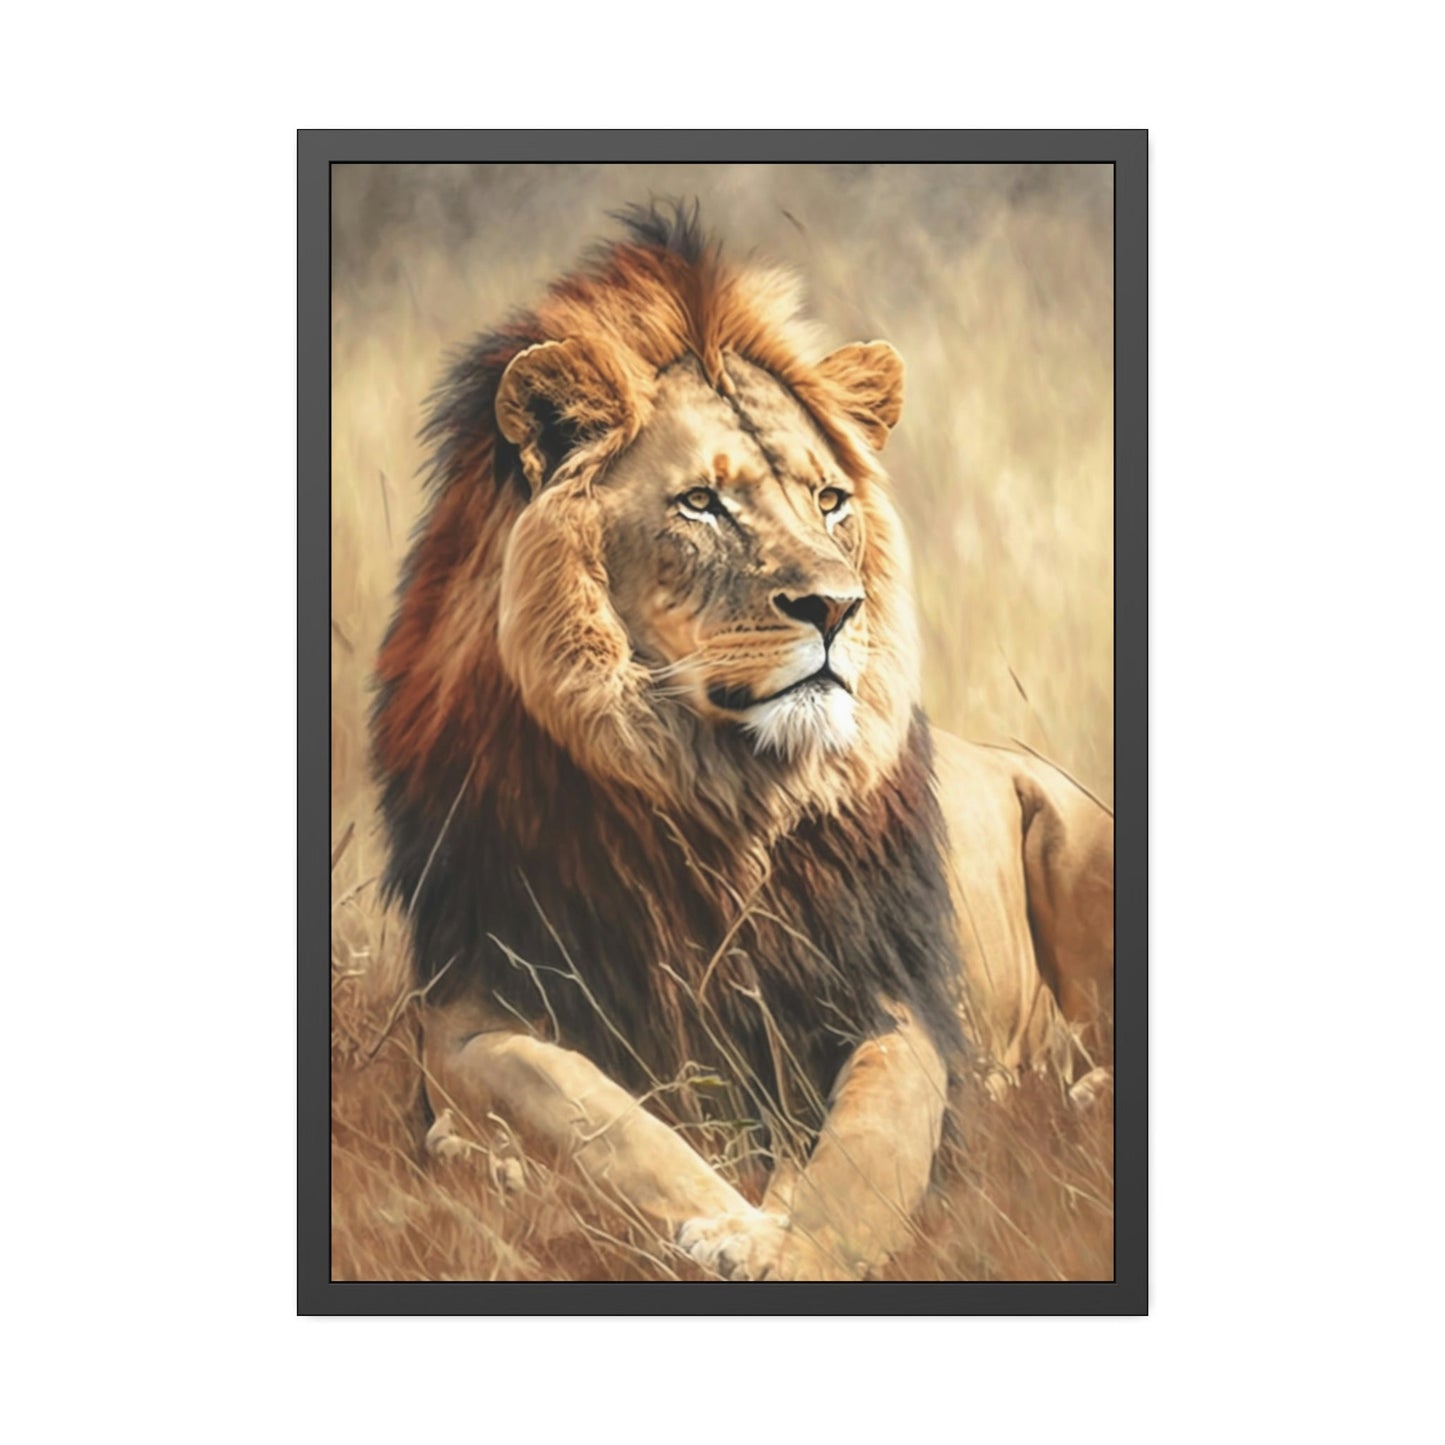 Lion Strength: An Artistic Work with Lion